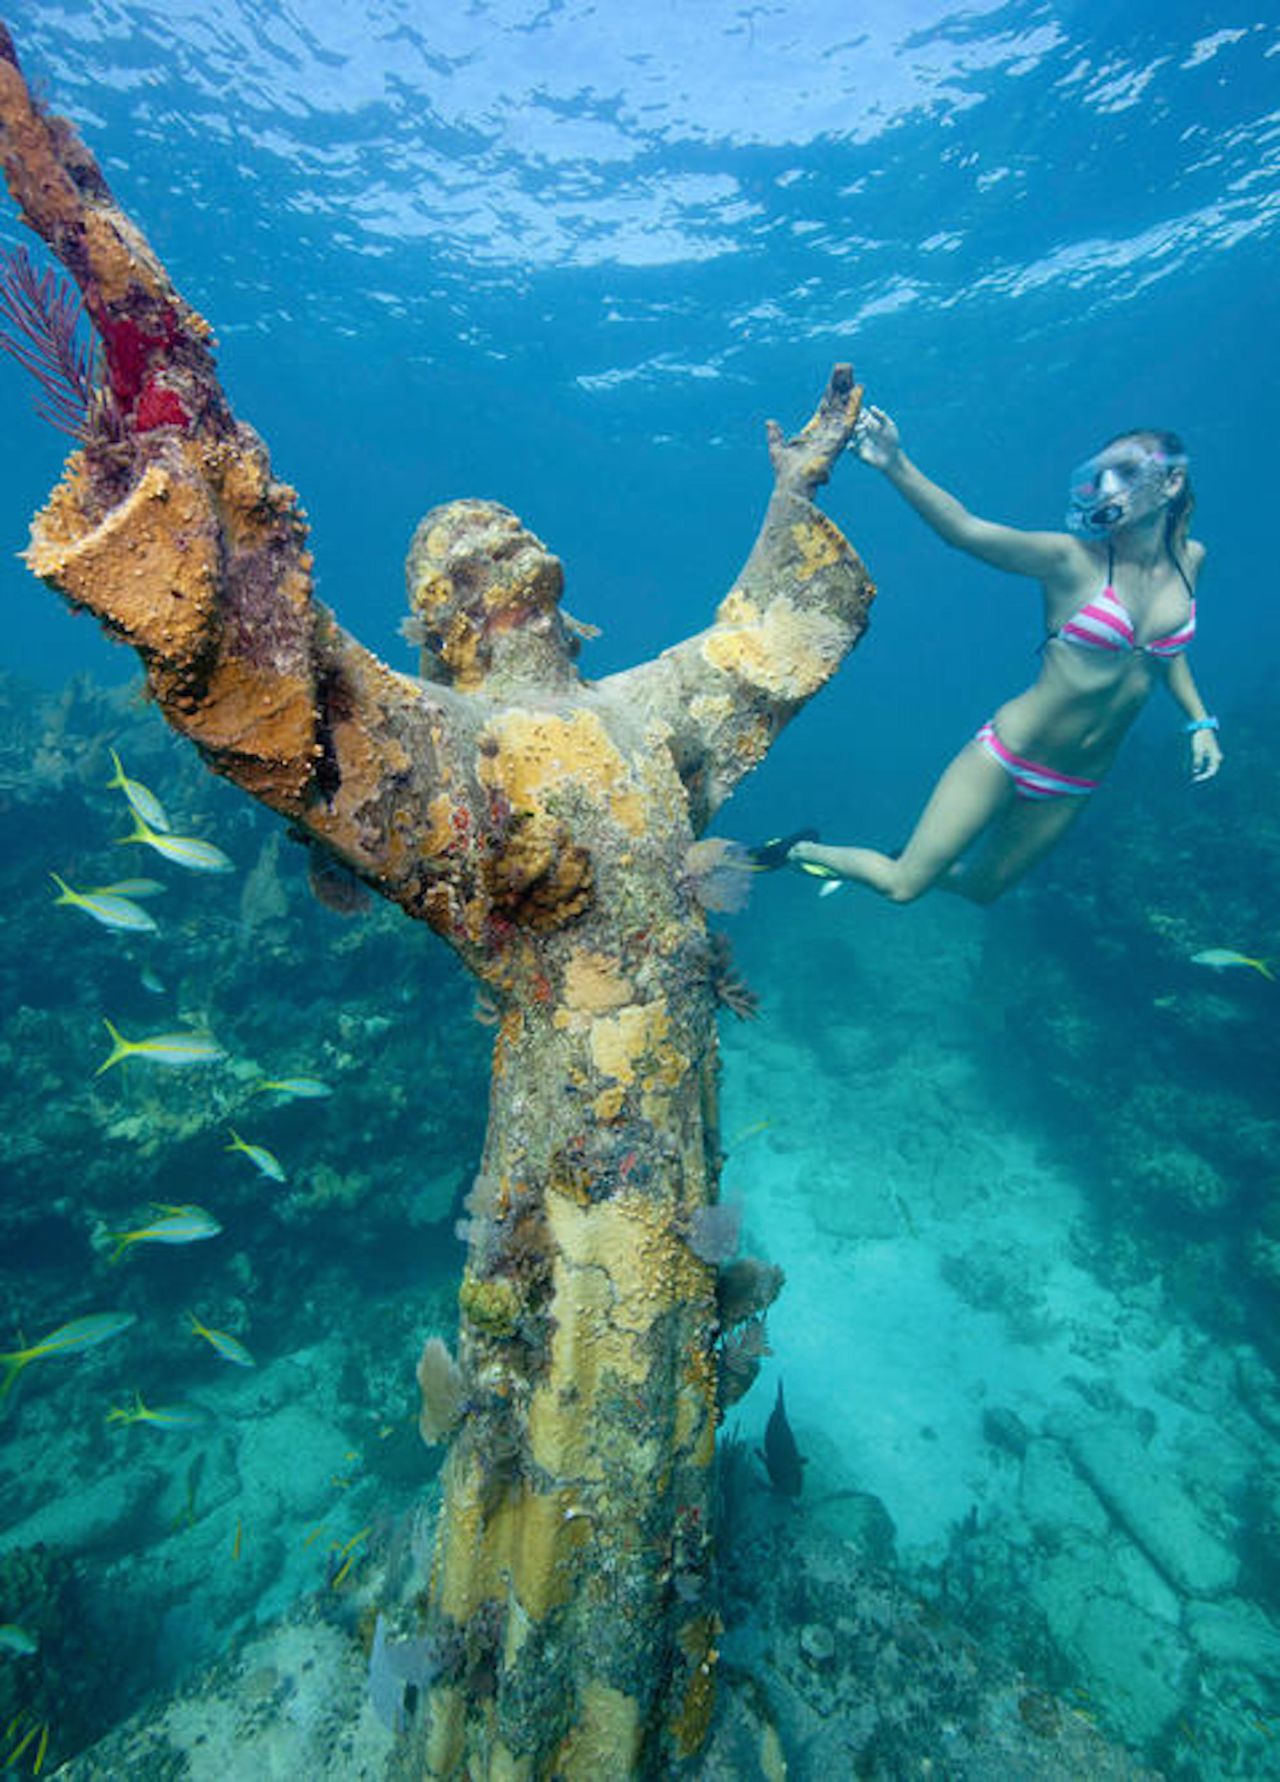 Sitting seven meters below the water surface, Christ of the Abyss is located in Key Largo, Florida. It's visible to swimmers but for a detailed look at the carvings it's easiest to slap on some scuba diving gear. 